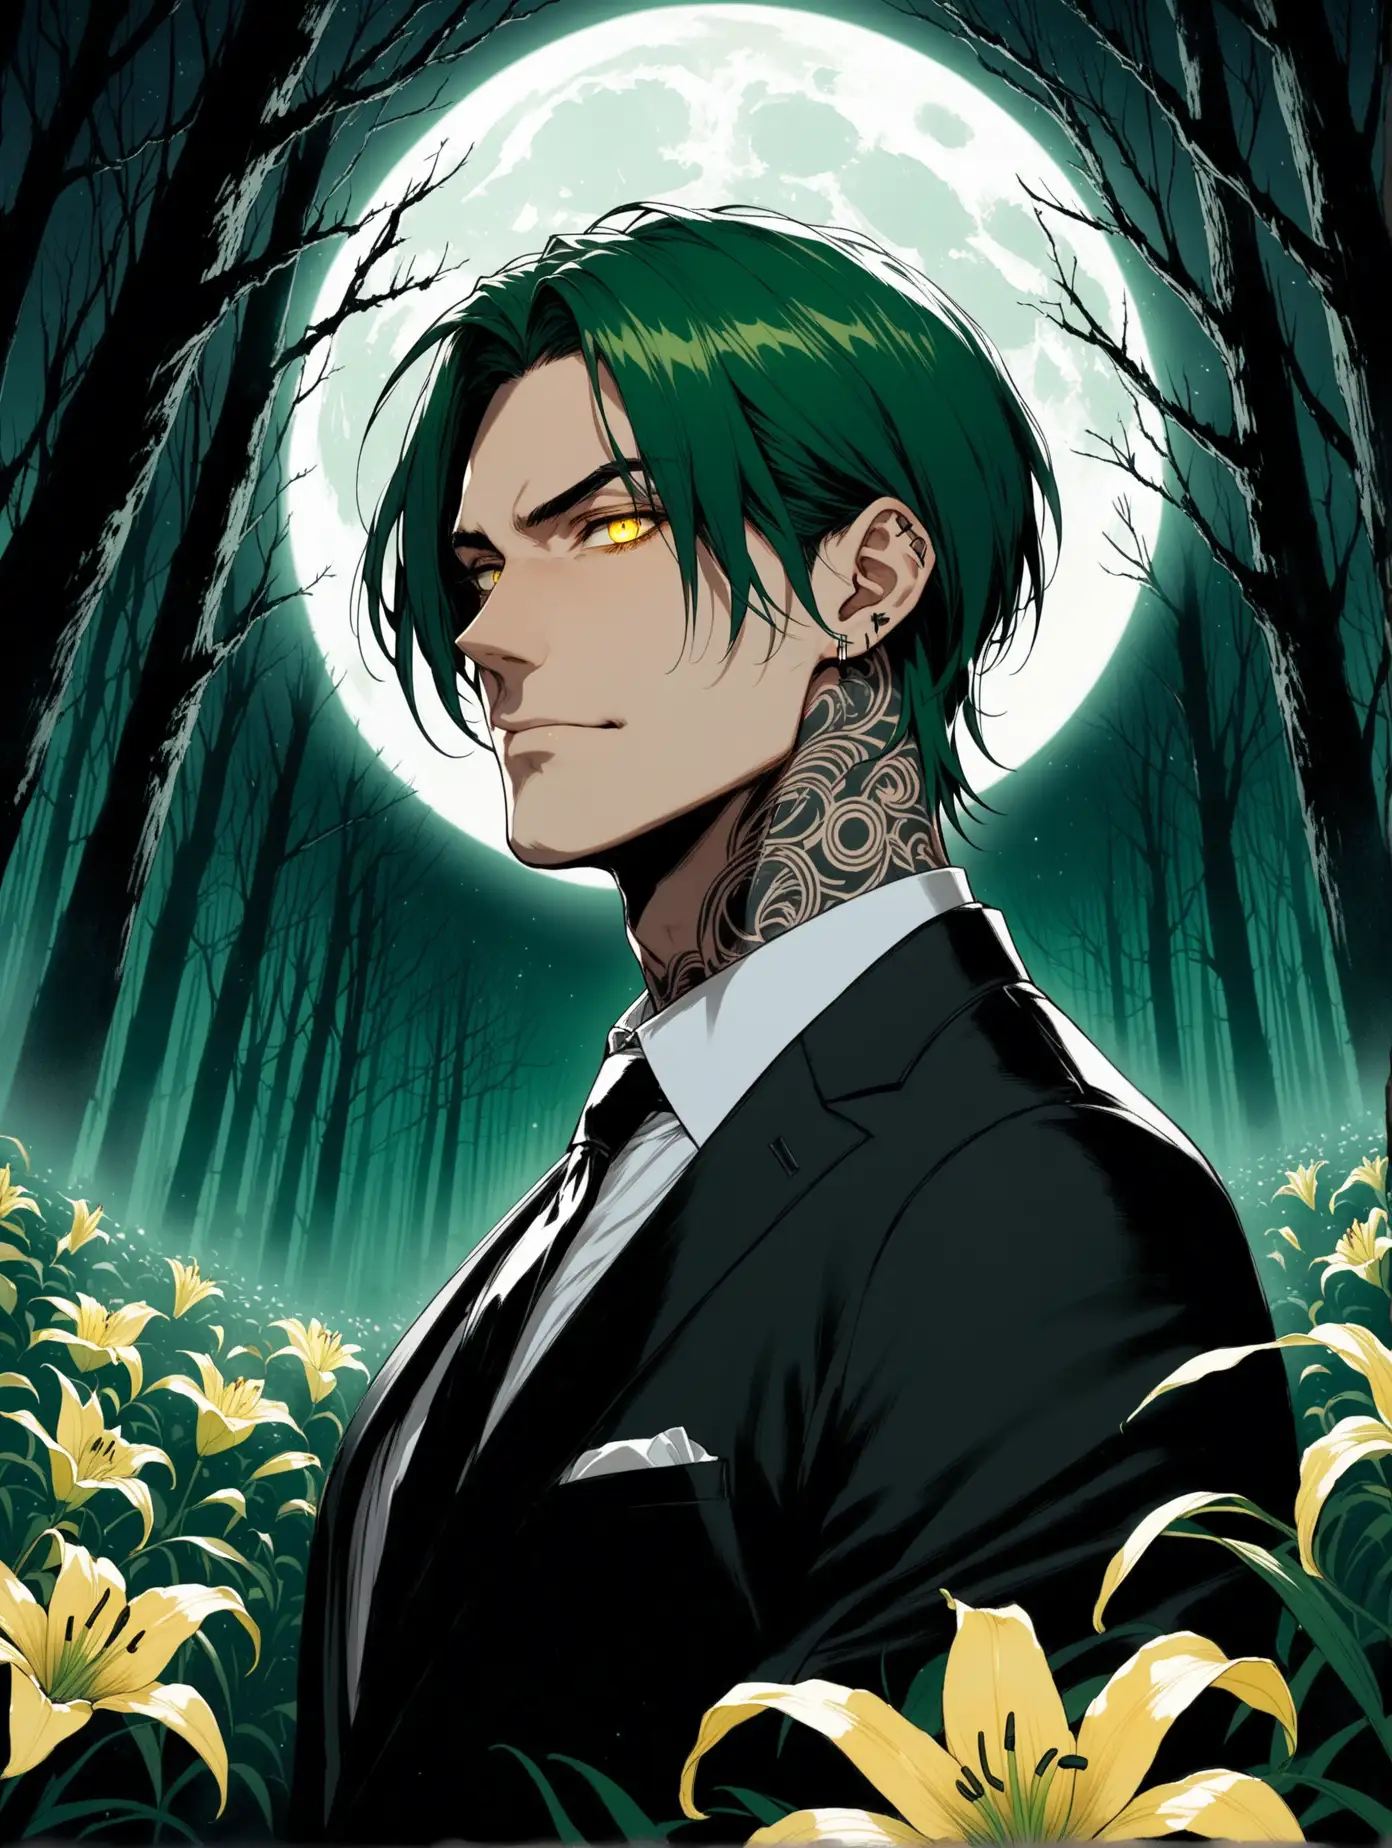 Haughty-Man-with-Dark-Green-Hair-and-Cross-Pendant-in-Night-Forest-Graveyard